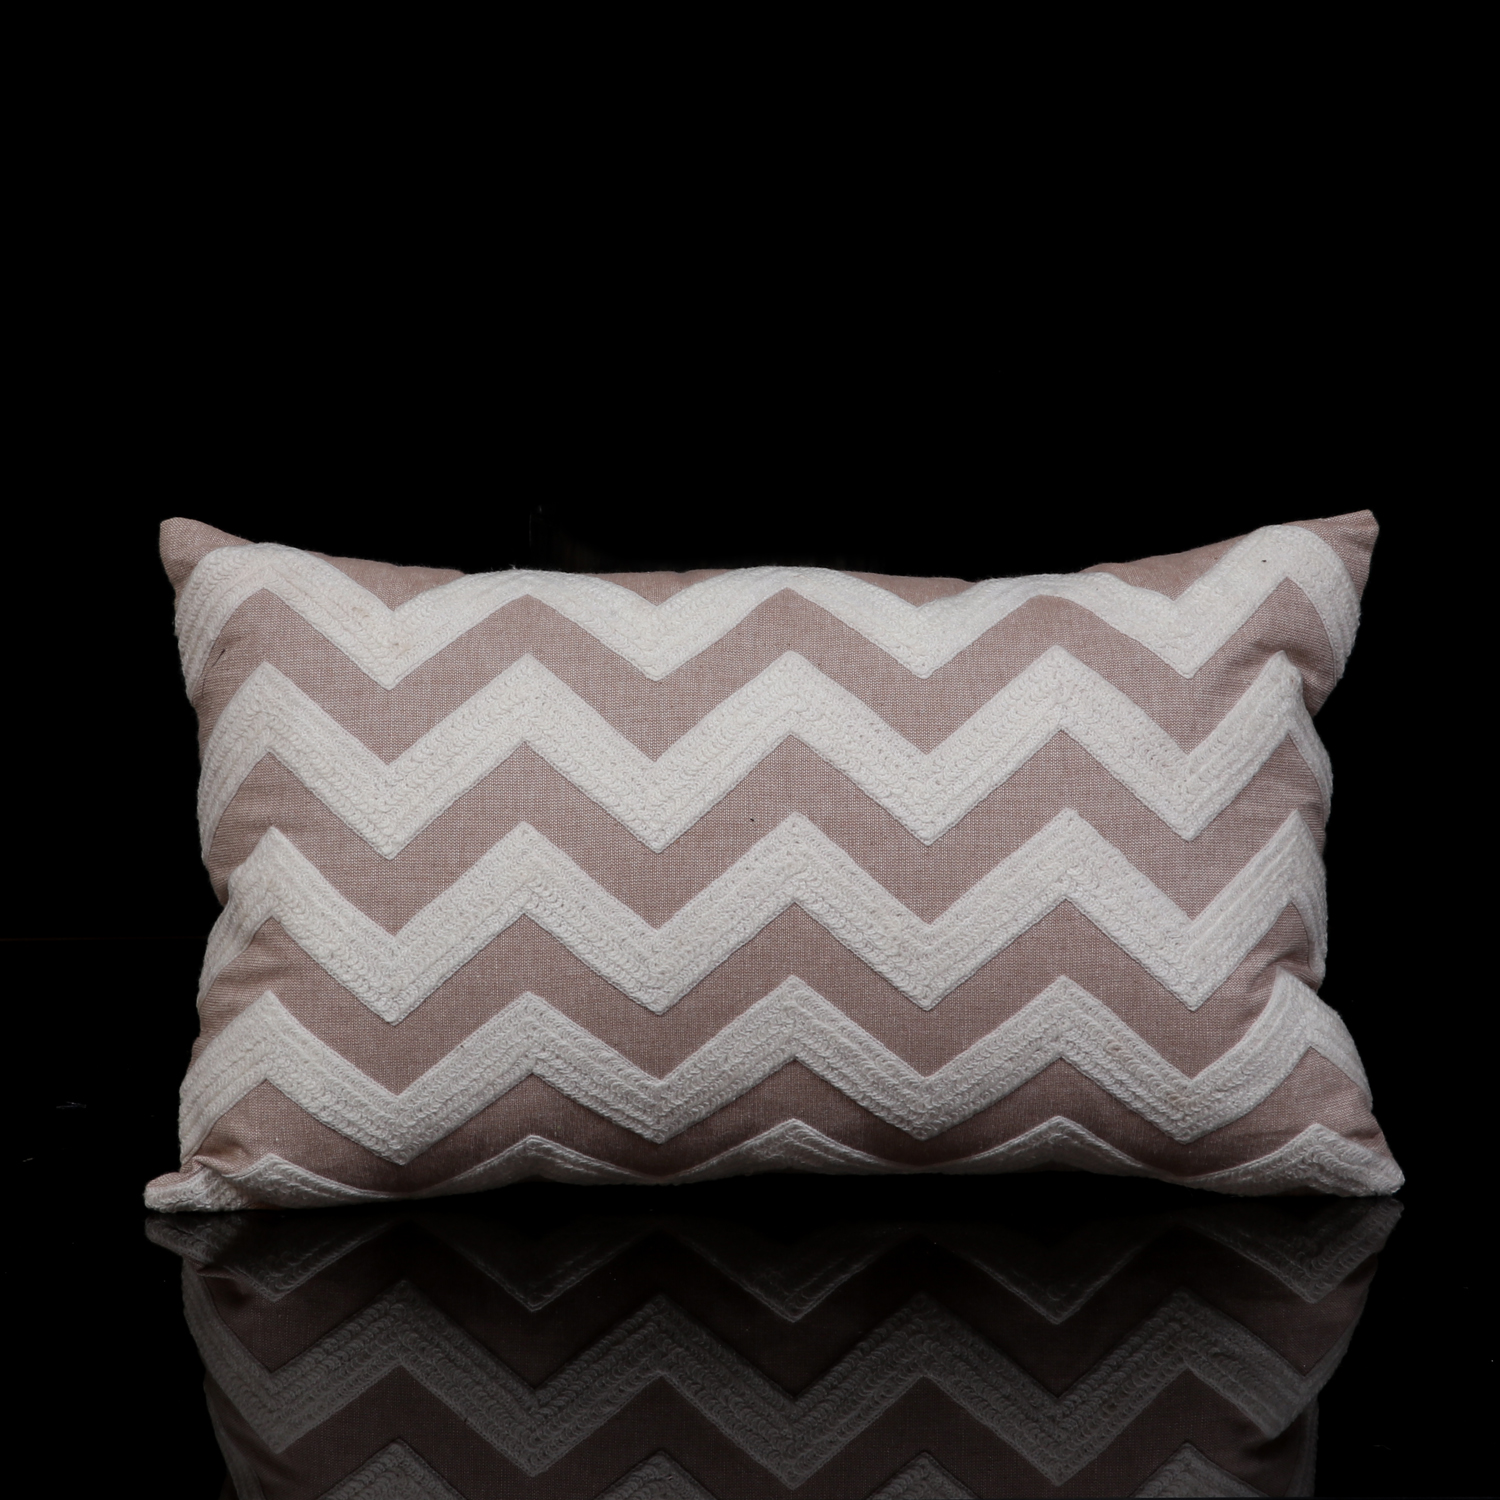 EMBROIDERED CHEVRON  PATTERN PILLOW